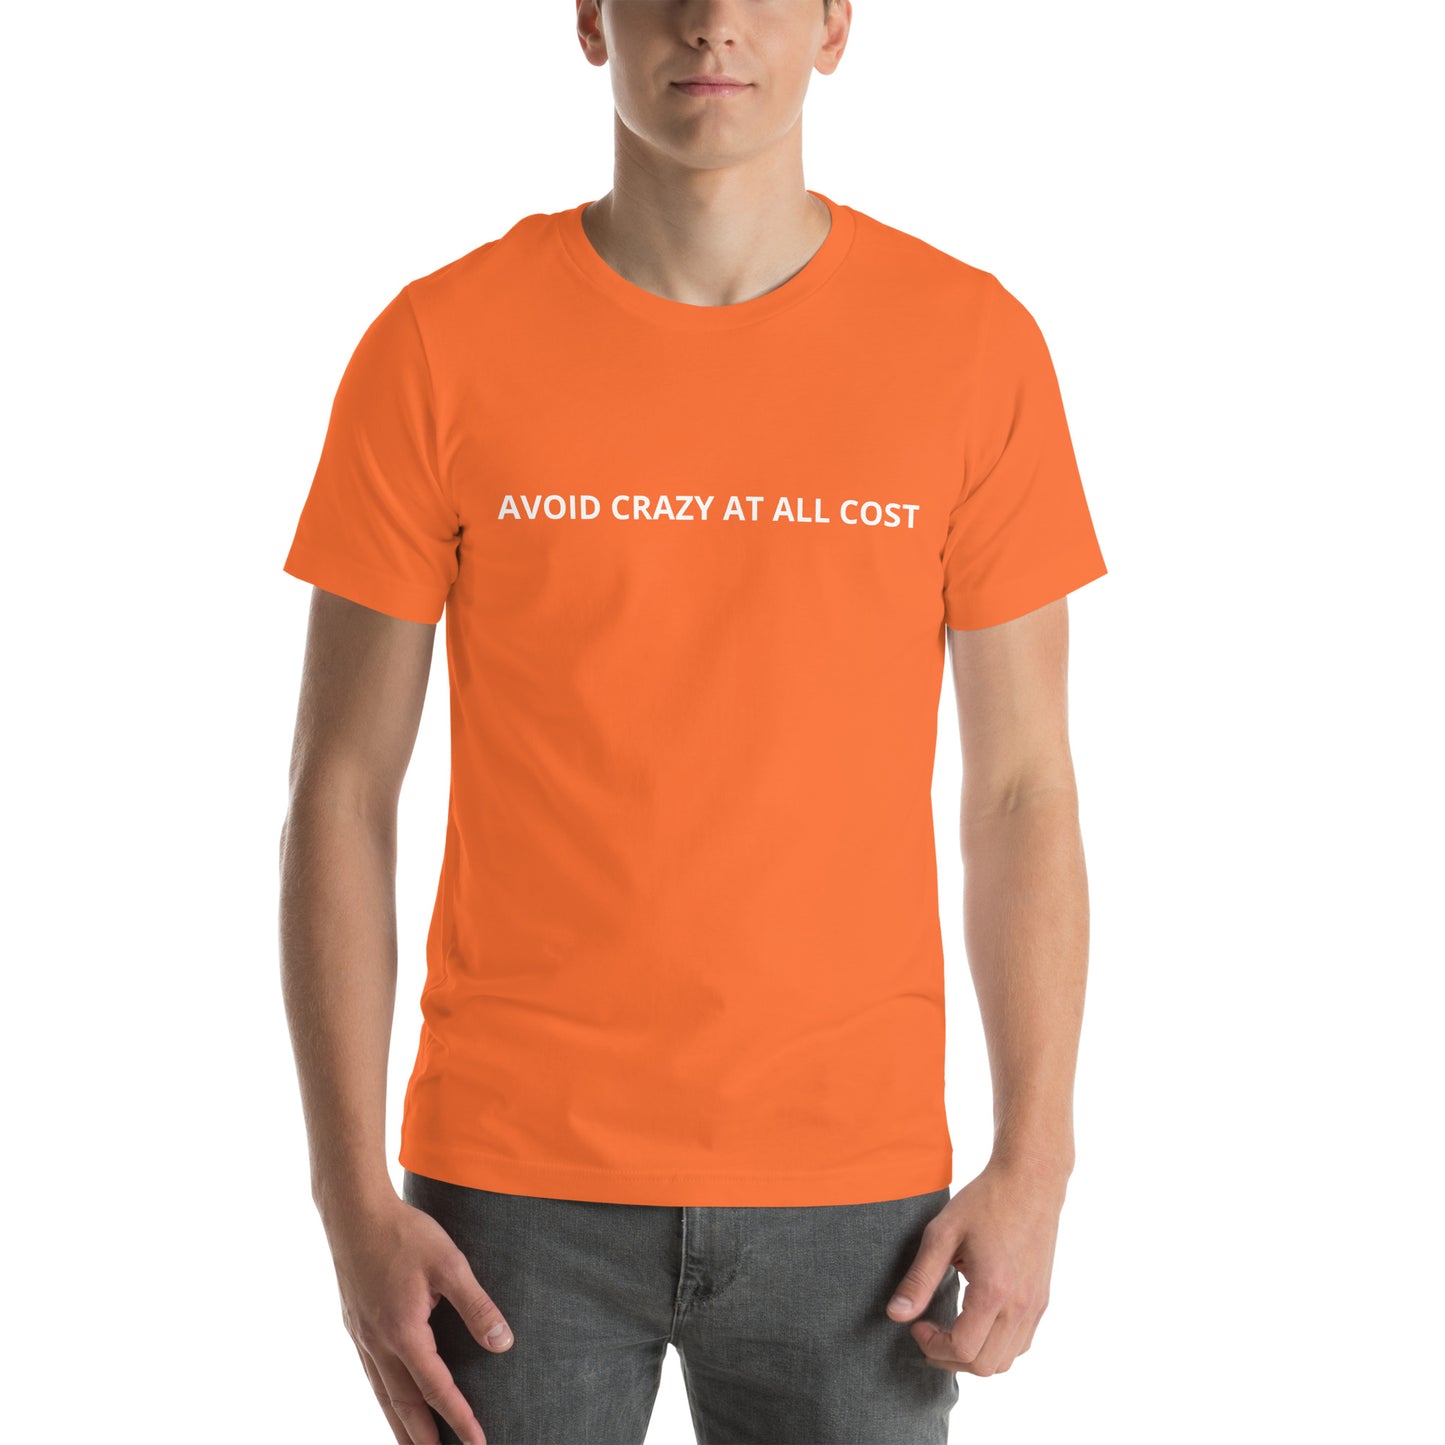 AVOID CRAZY AT ALL COST  Unisex t-shirt